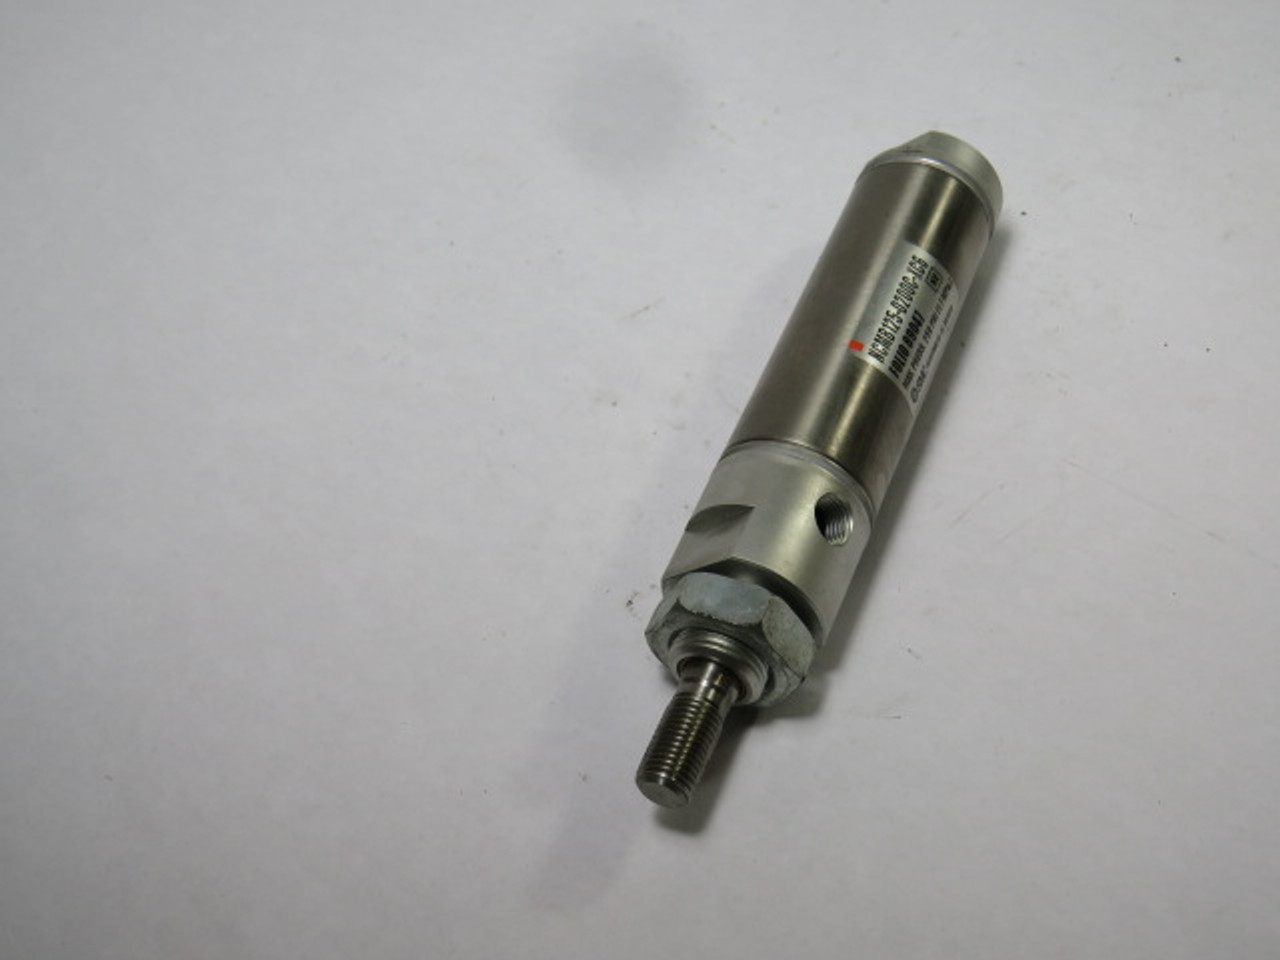 SMC NCMB125-0200C-XC6 Pneumatic Air Cylinder 7/16-2" Bore 250PSI USED